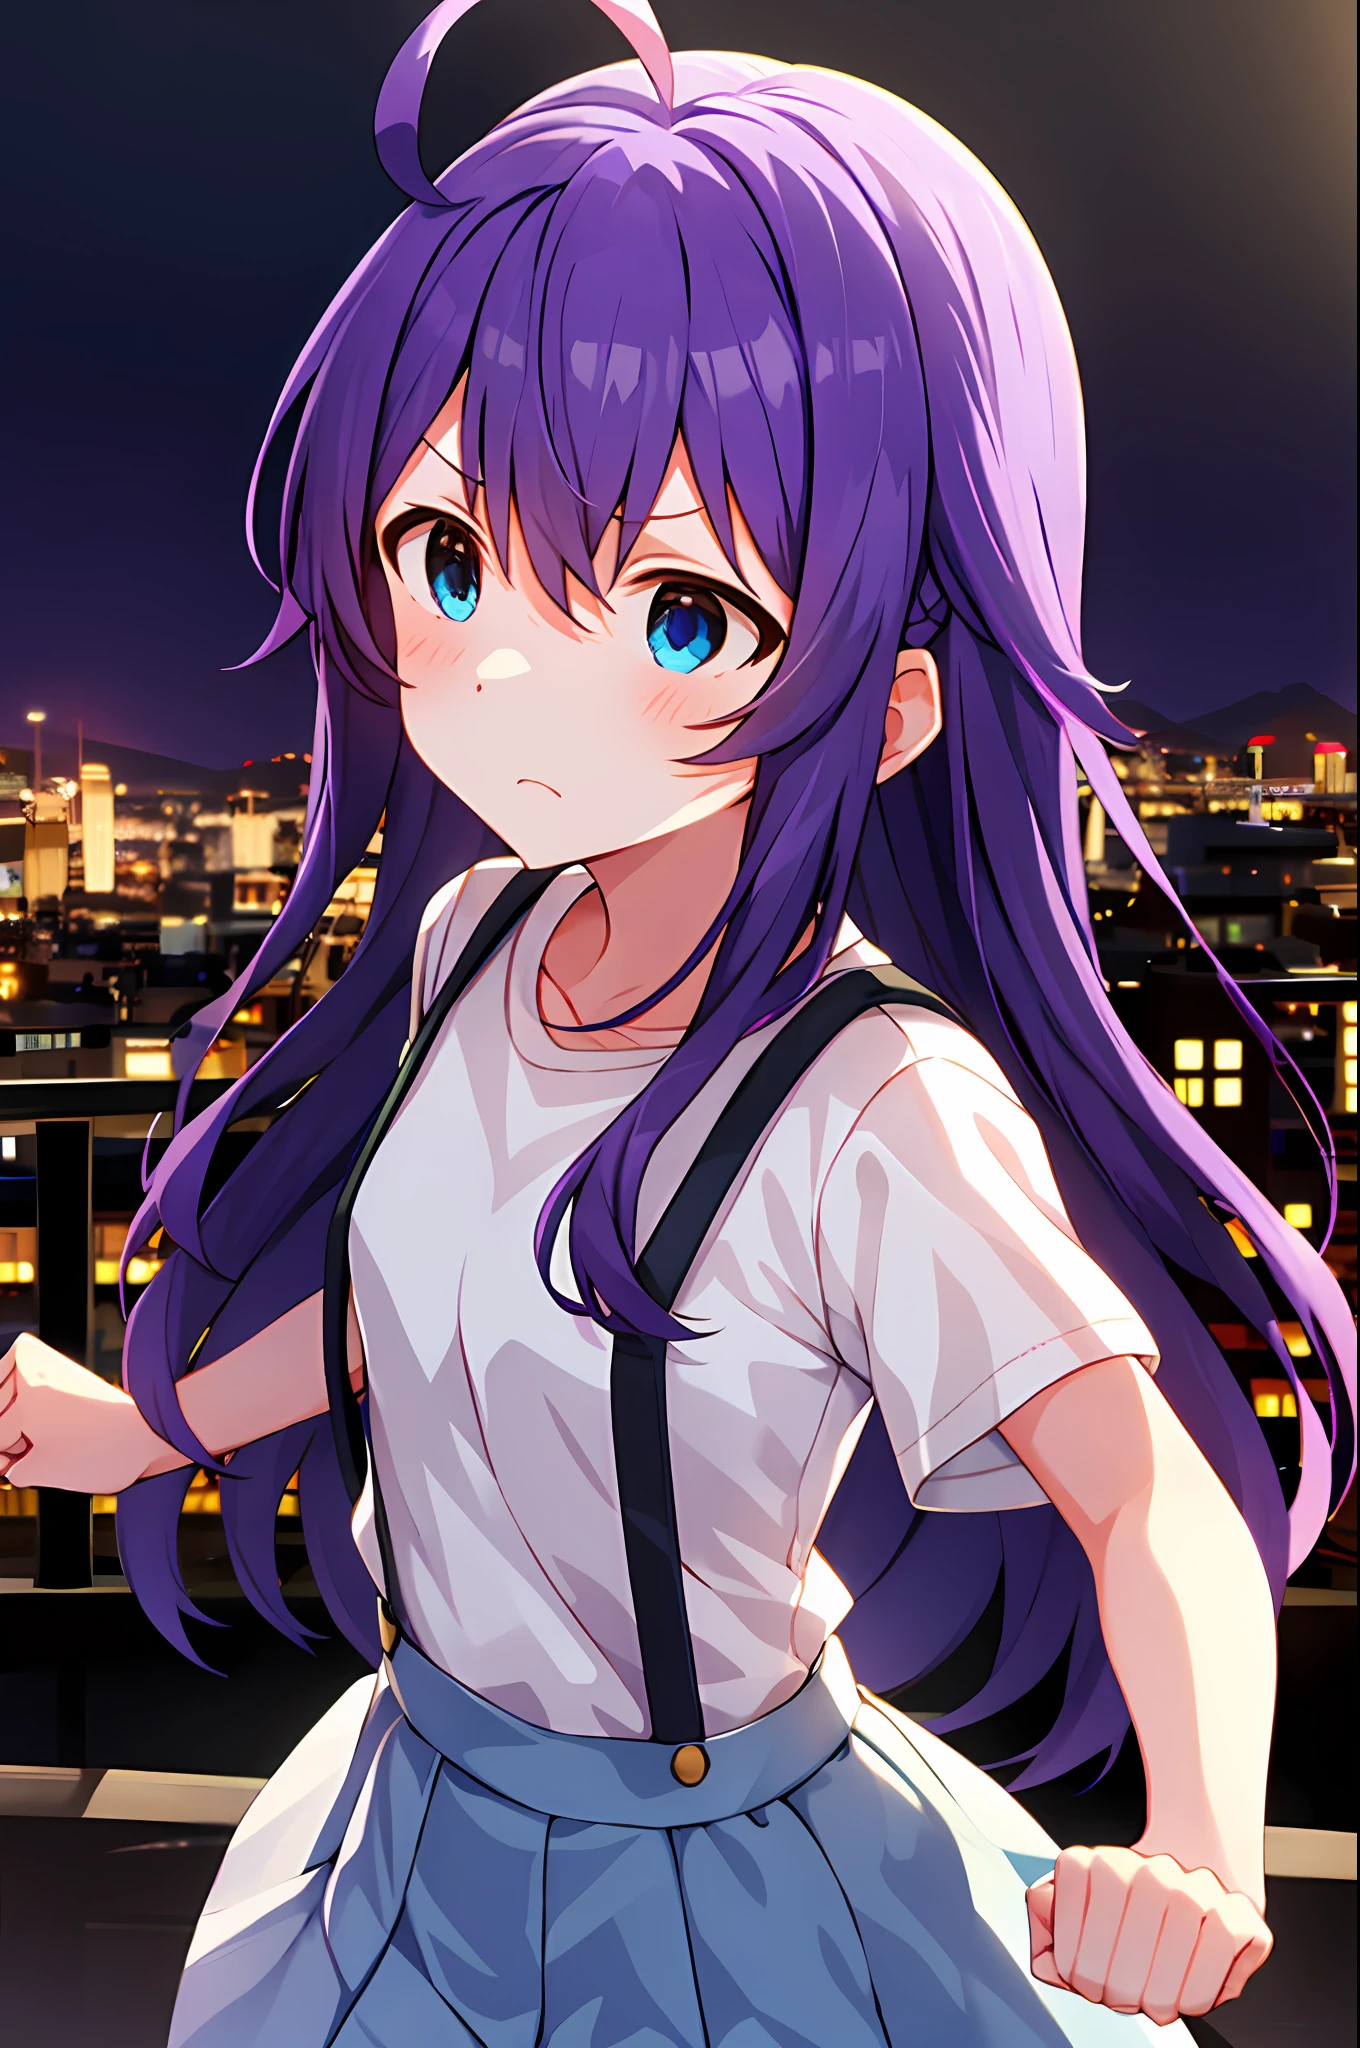 mochizuki anna,1girls,Solo,Long hair,Purple hair,Small_Ahoge,Blue eyes.Short stature.white t-shirts.suspenders.Skirt.Night view.fighting stance.Despair face.Clench your fists.